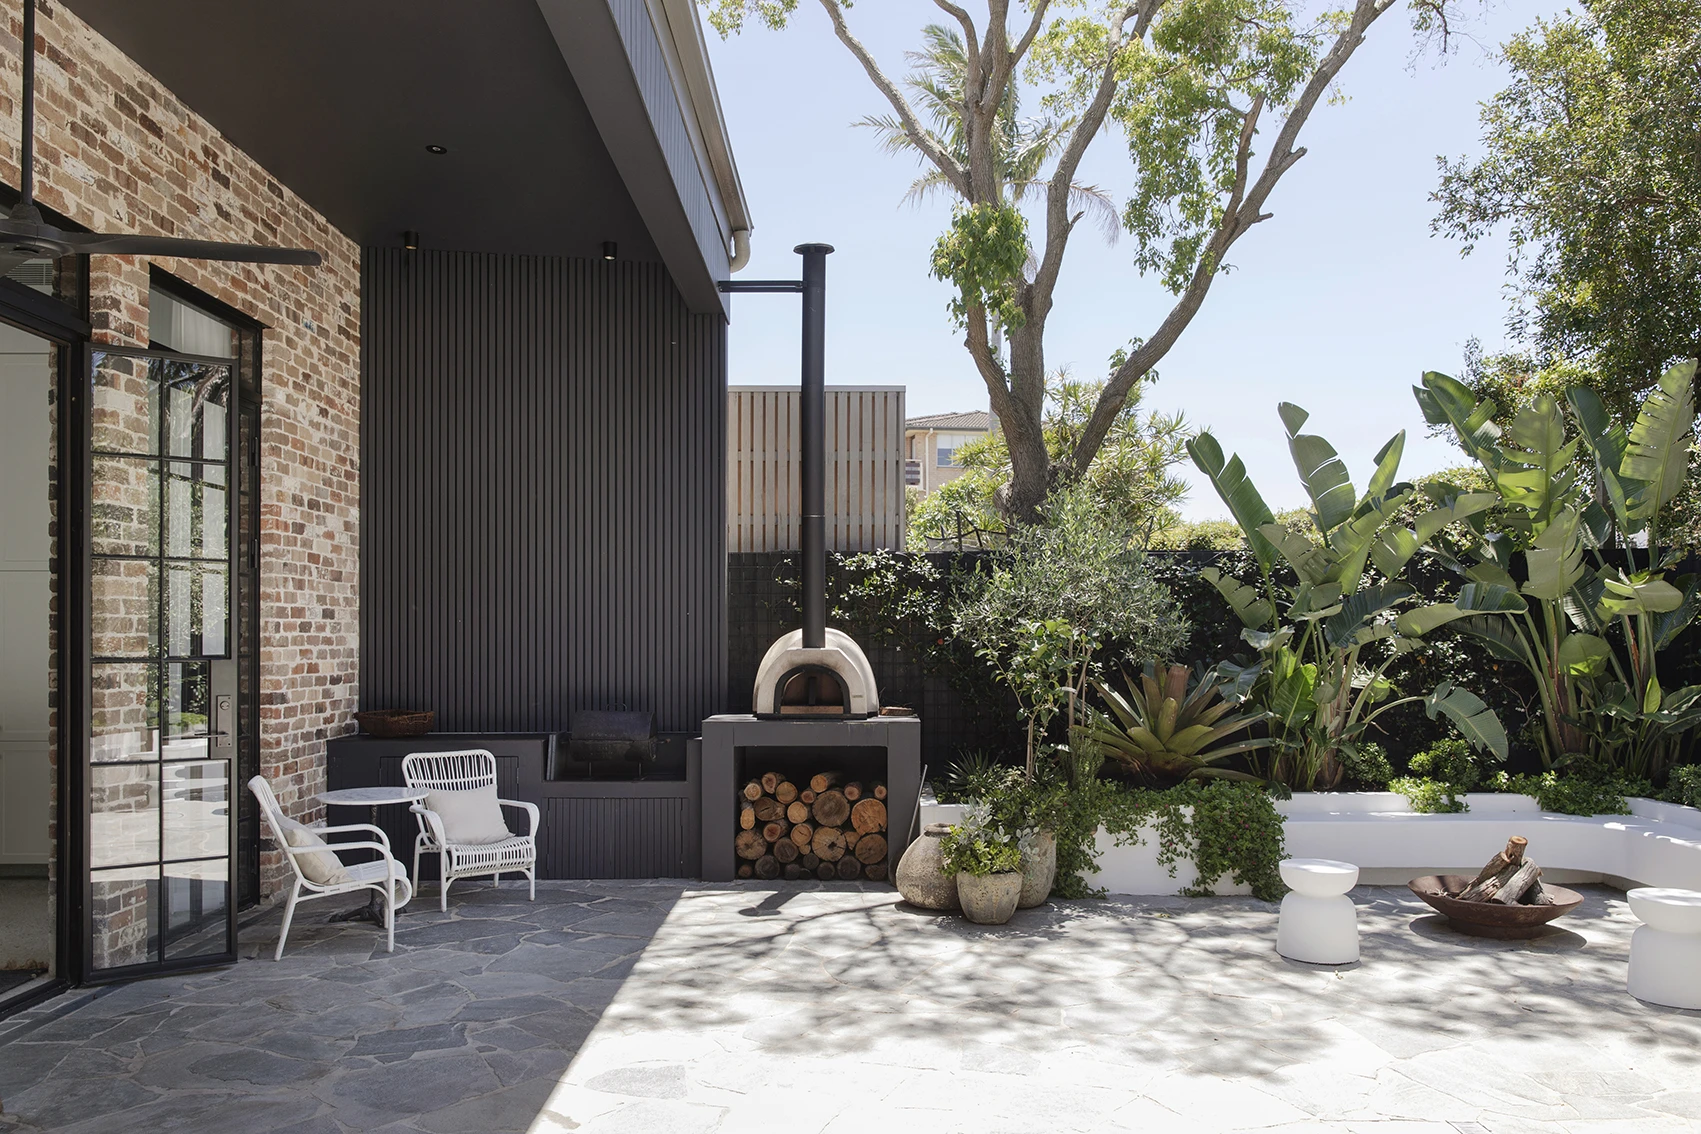 Outdoor entertaining area with wood-fired pizza oven and white wicker chairs.